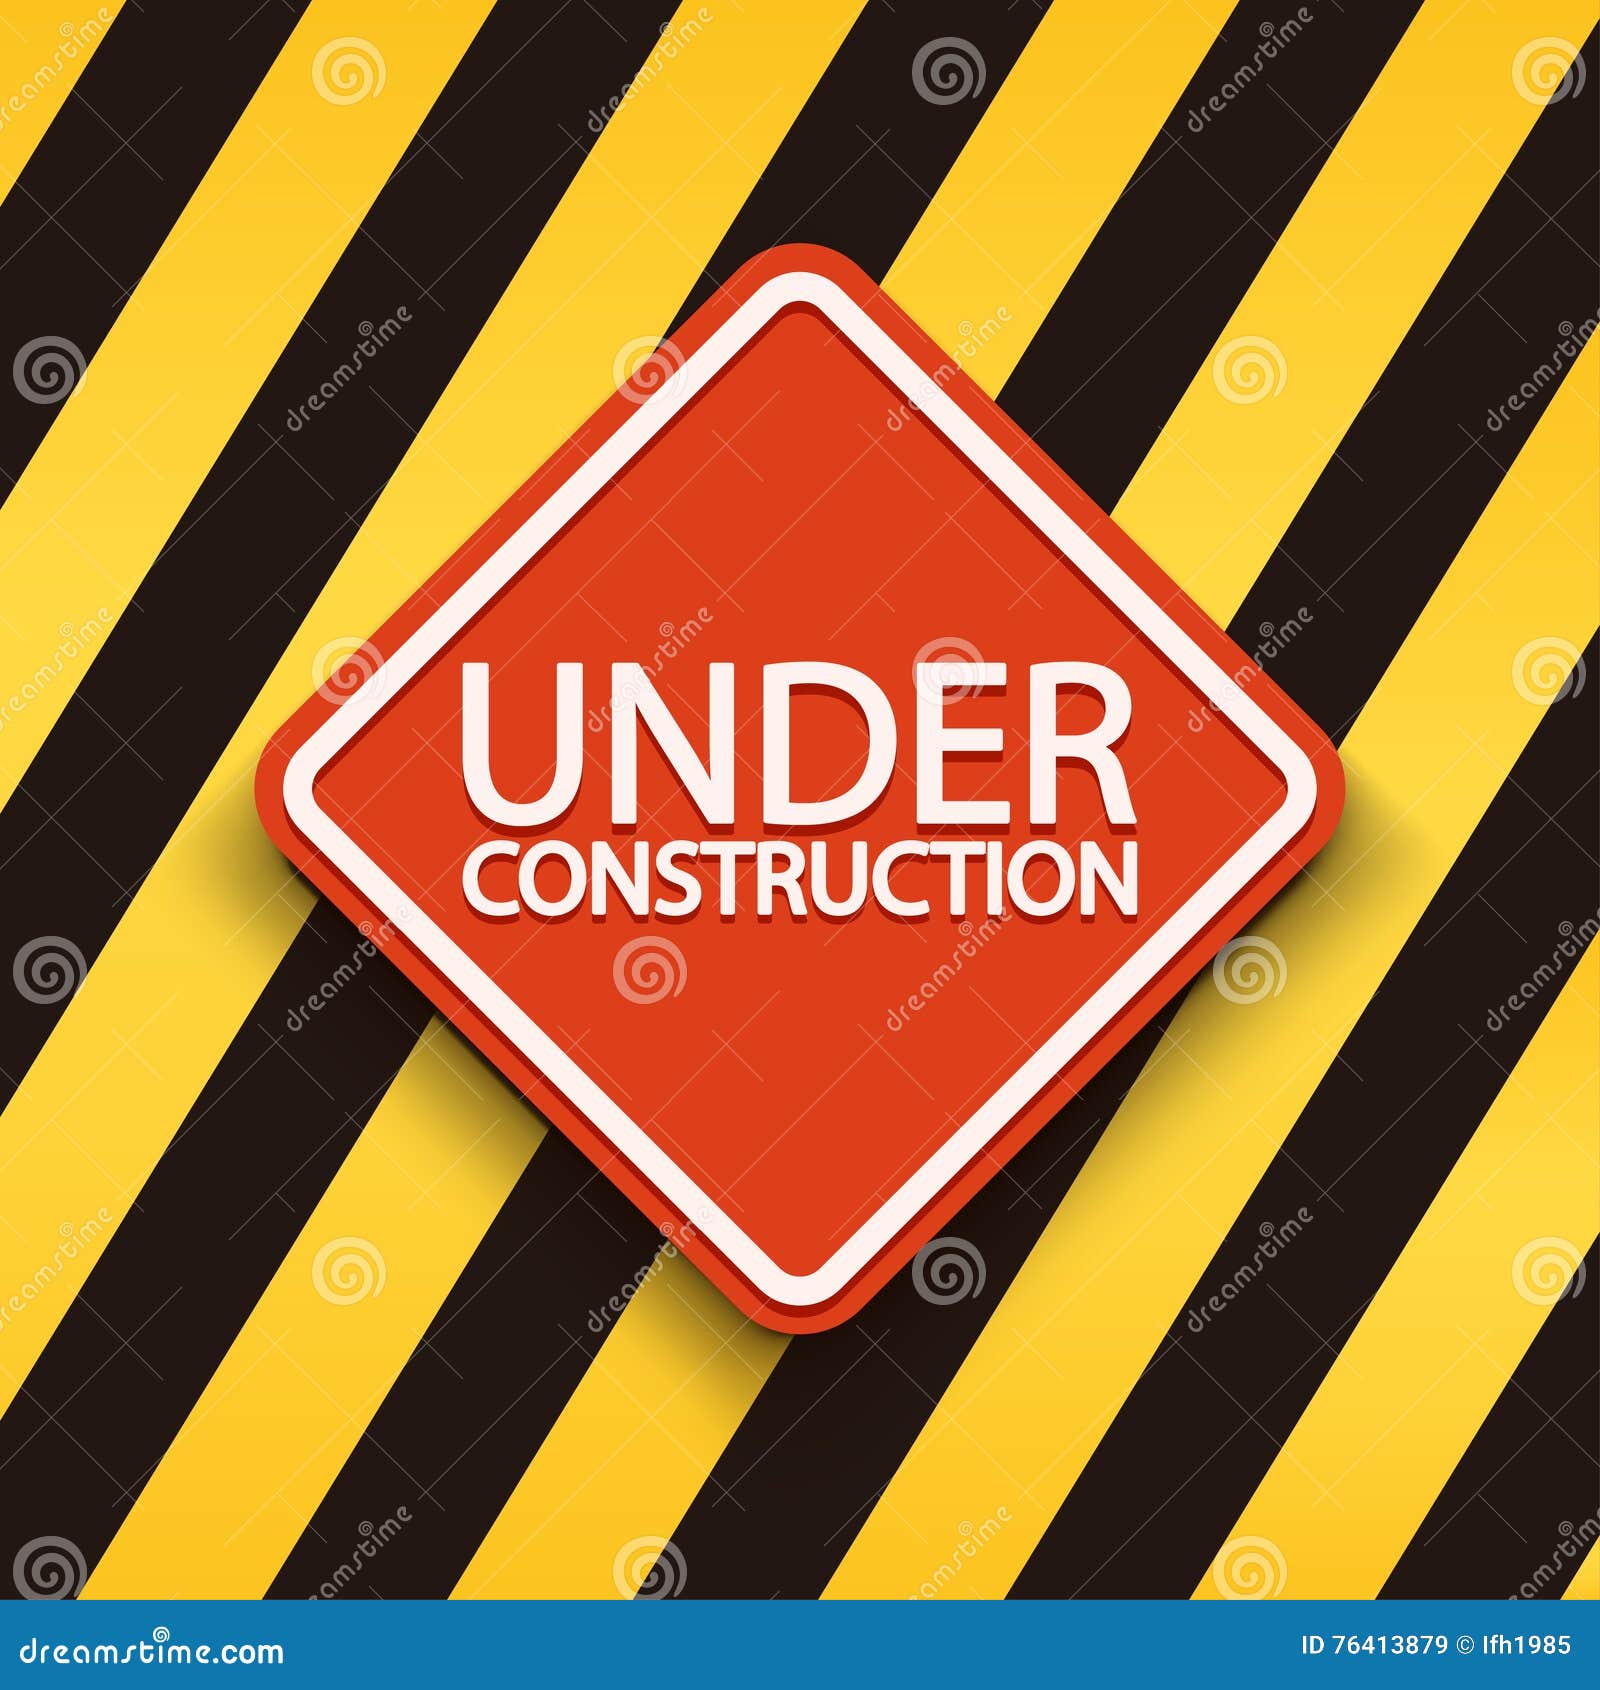 Red sign stripes stock vector. Illustration of caution - 76413879